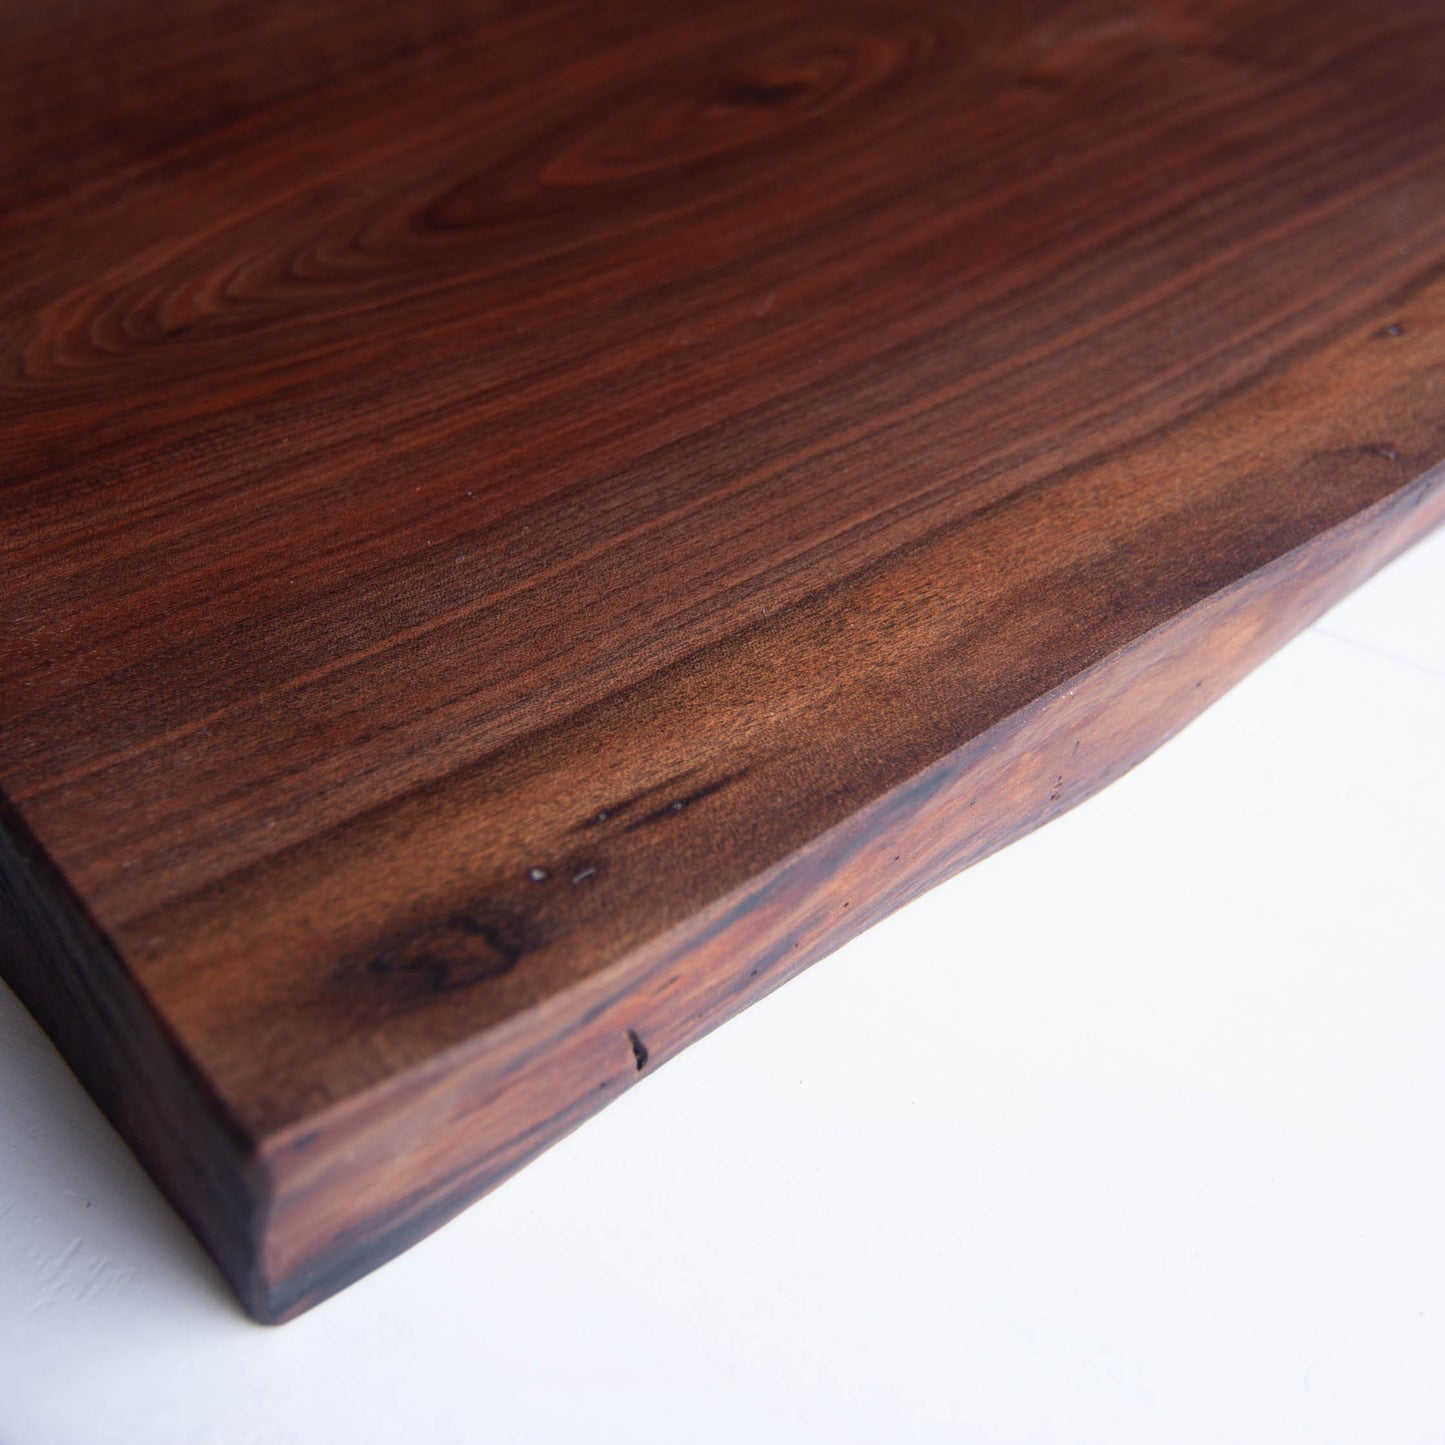 A close up of a walnut cutting board showing the figured grain and live edge